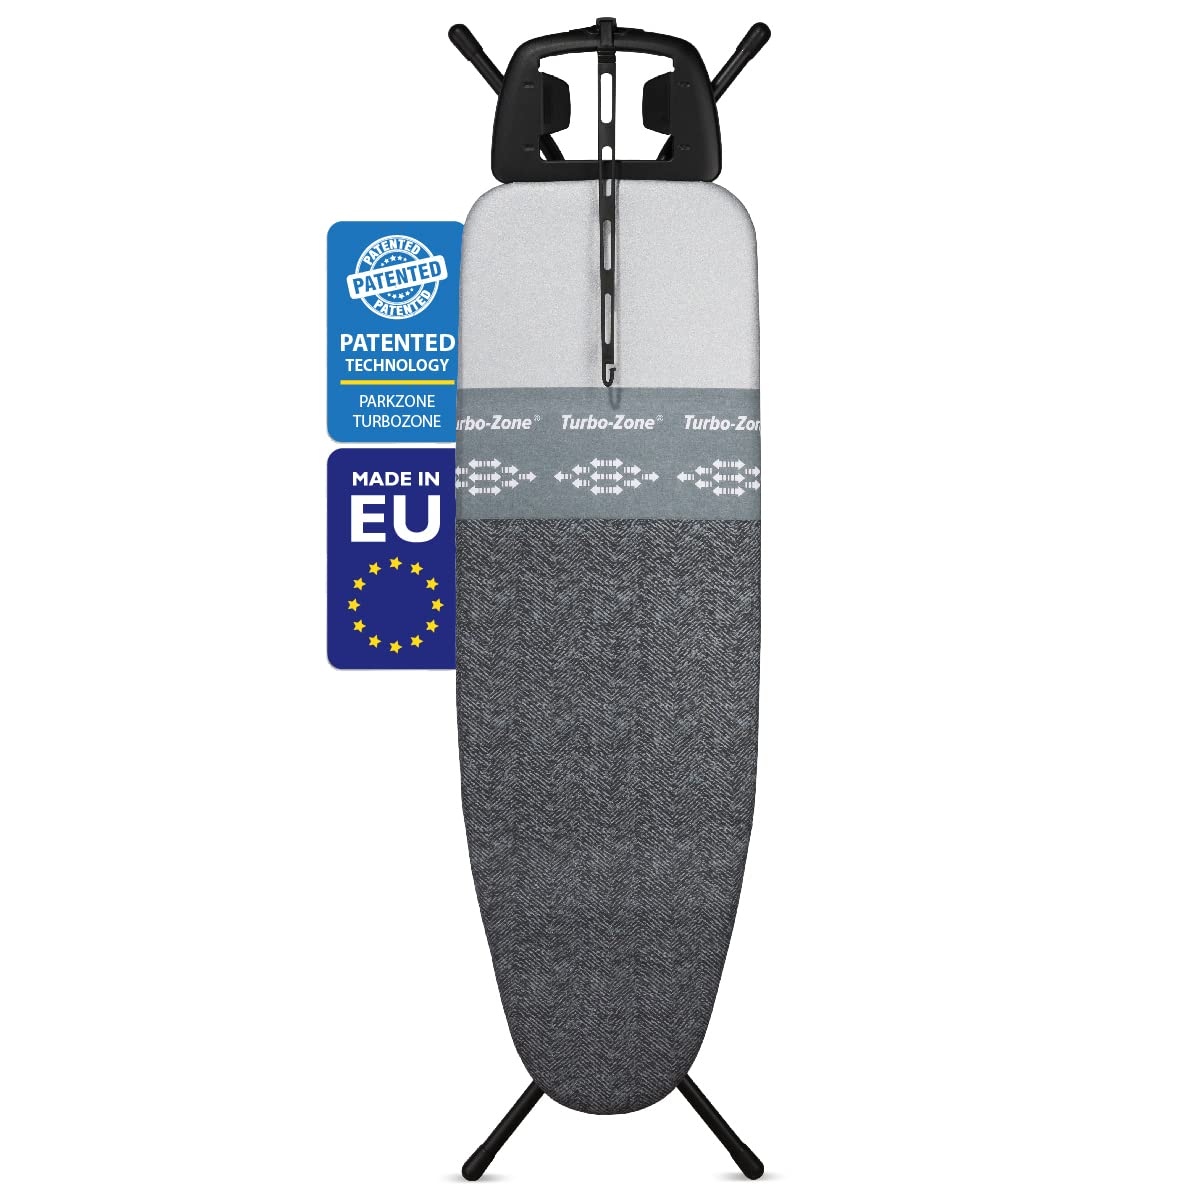 Bartnelli Heavy Duty Ironing Board 48x15 | Designed & Made in Europe with Patent Technology, Turbo & Park Zone, Features: 4 Layer Cover &Pad,Height-Adjustable,4 Premium Steel Legs,Upgraded Iron Rest.  - Like New